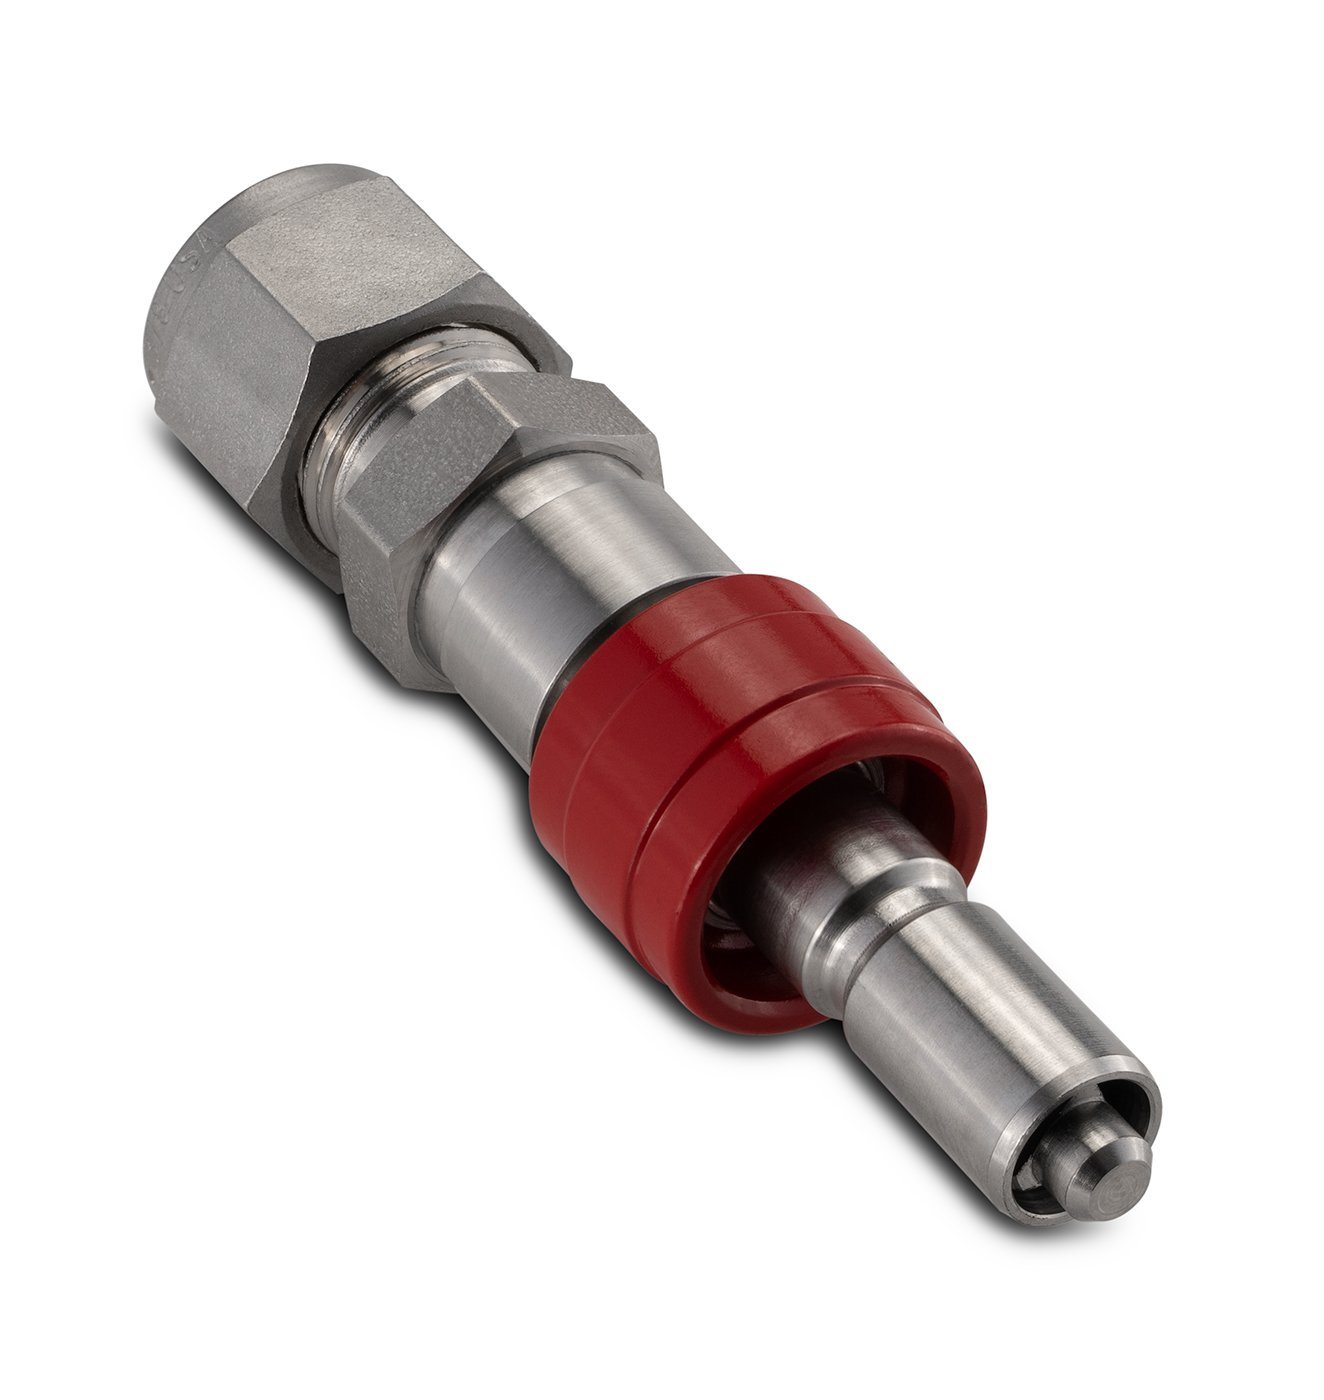 Quick Disconnect - Fractional Tube Fitting - STEM Shop All Categories SSP Corporation 